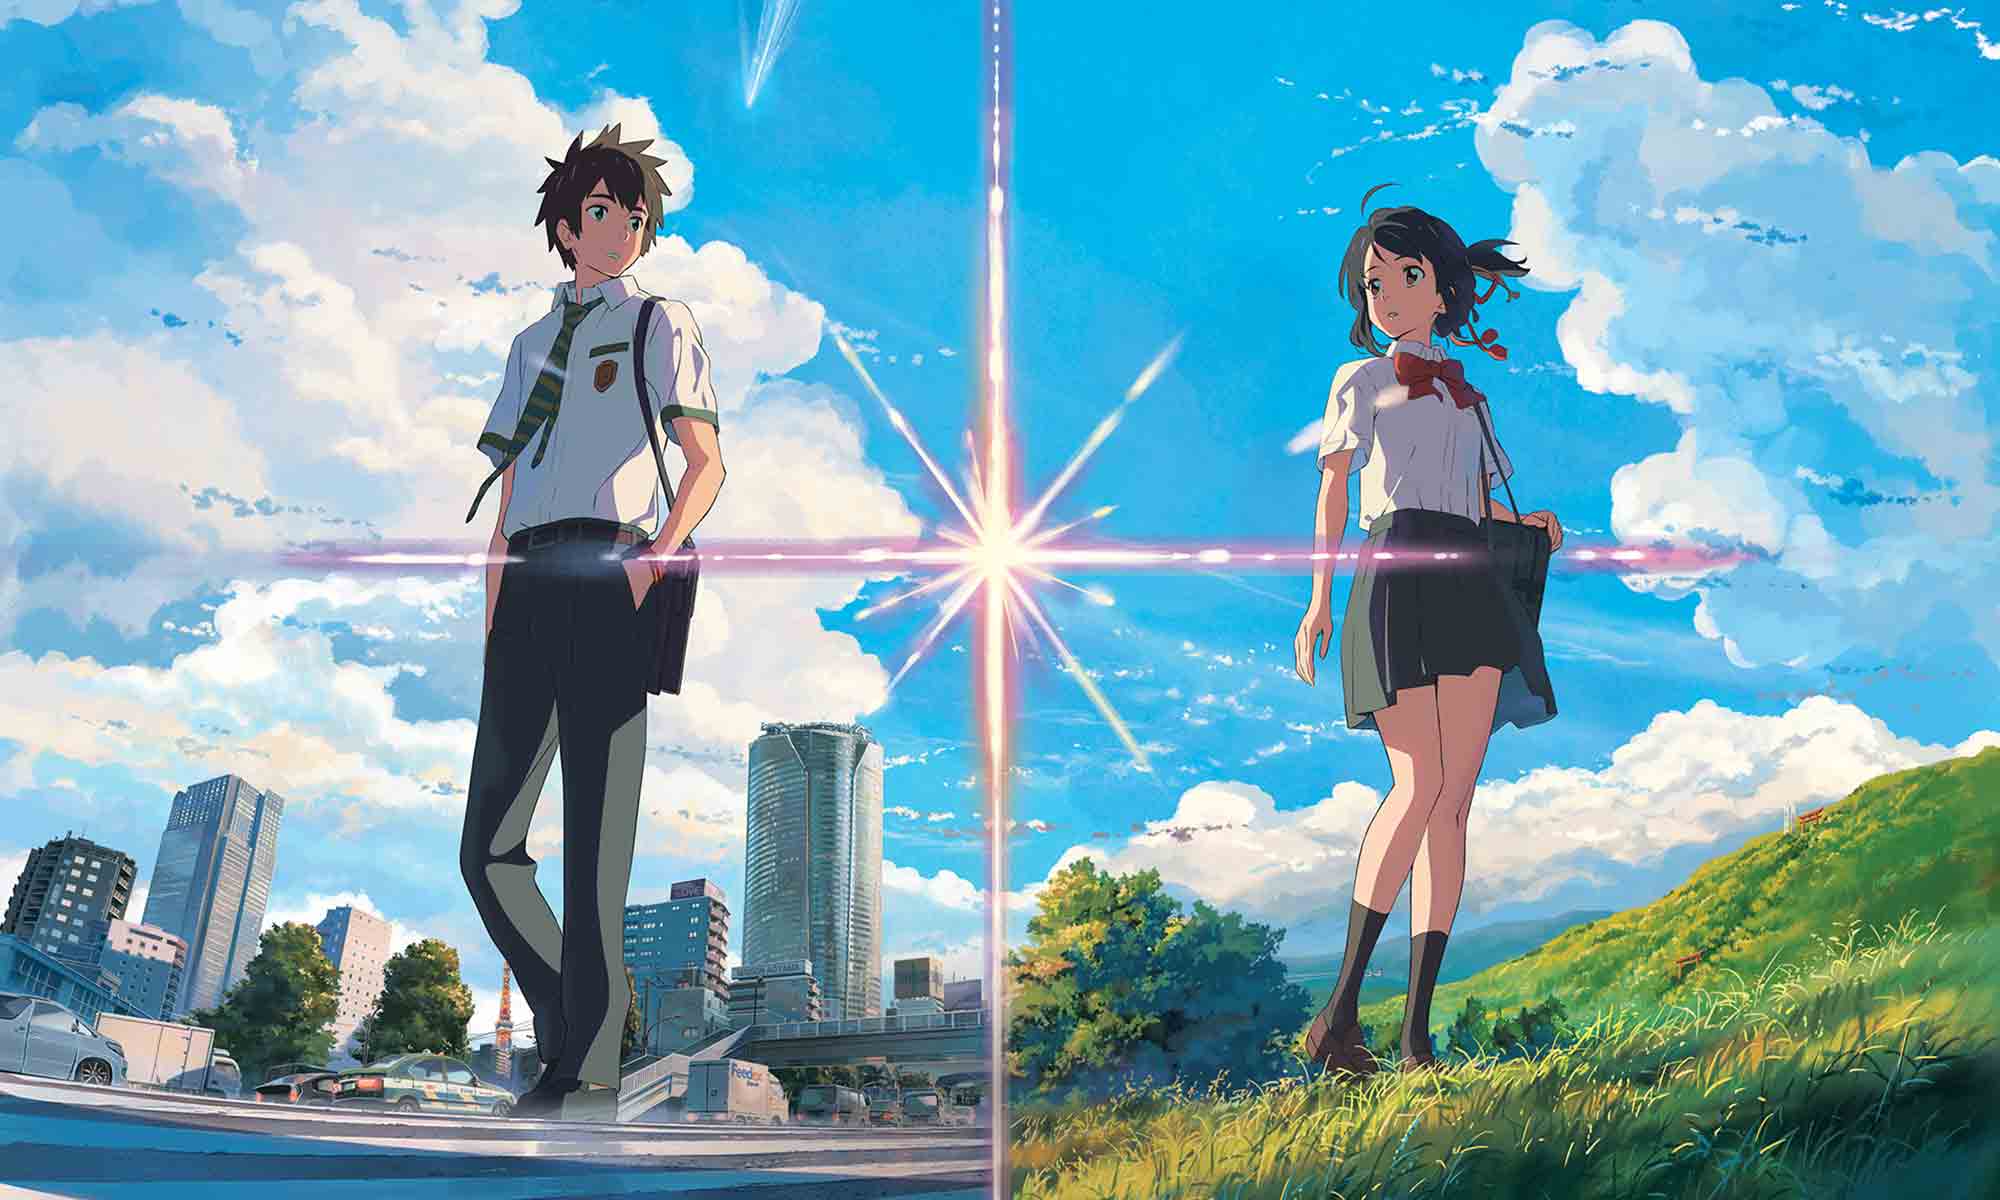 Your Name Anime Movie to get Live-Action Hollywood Adaption